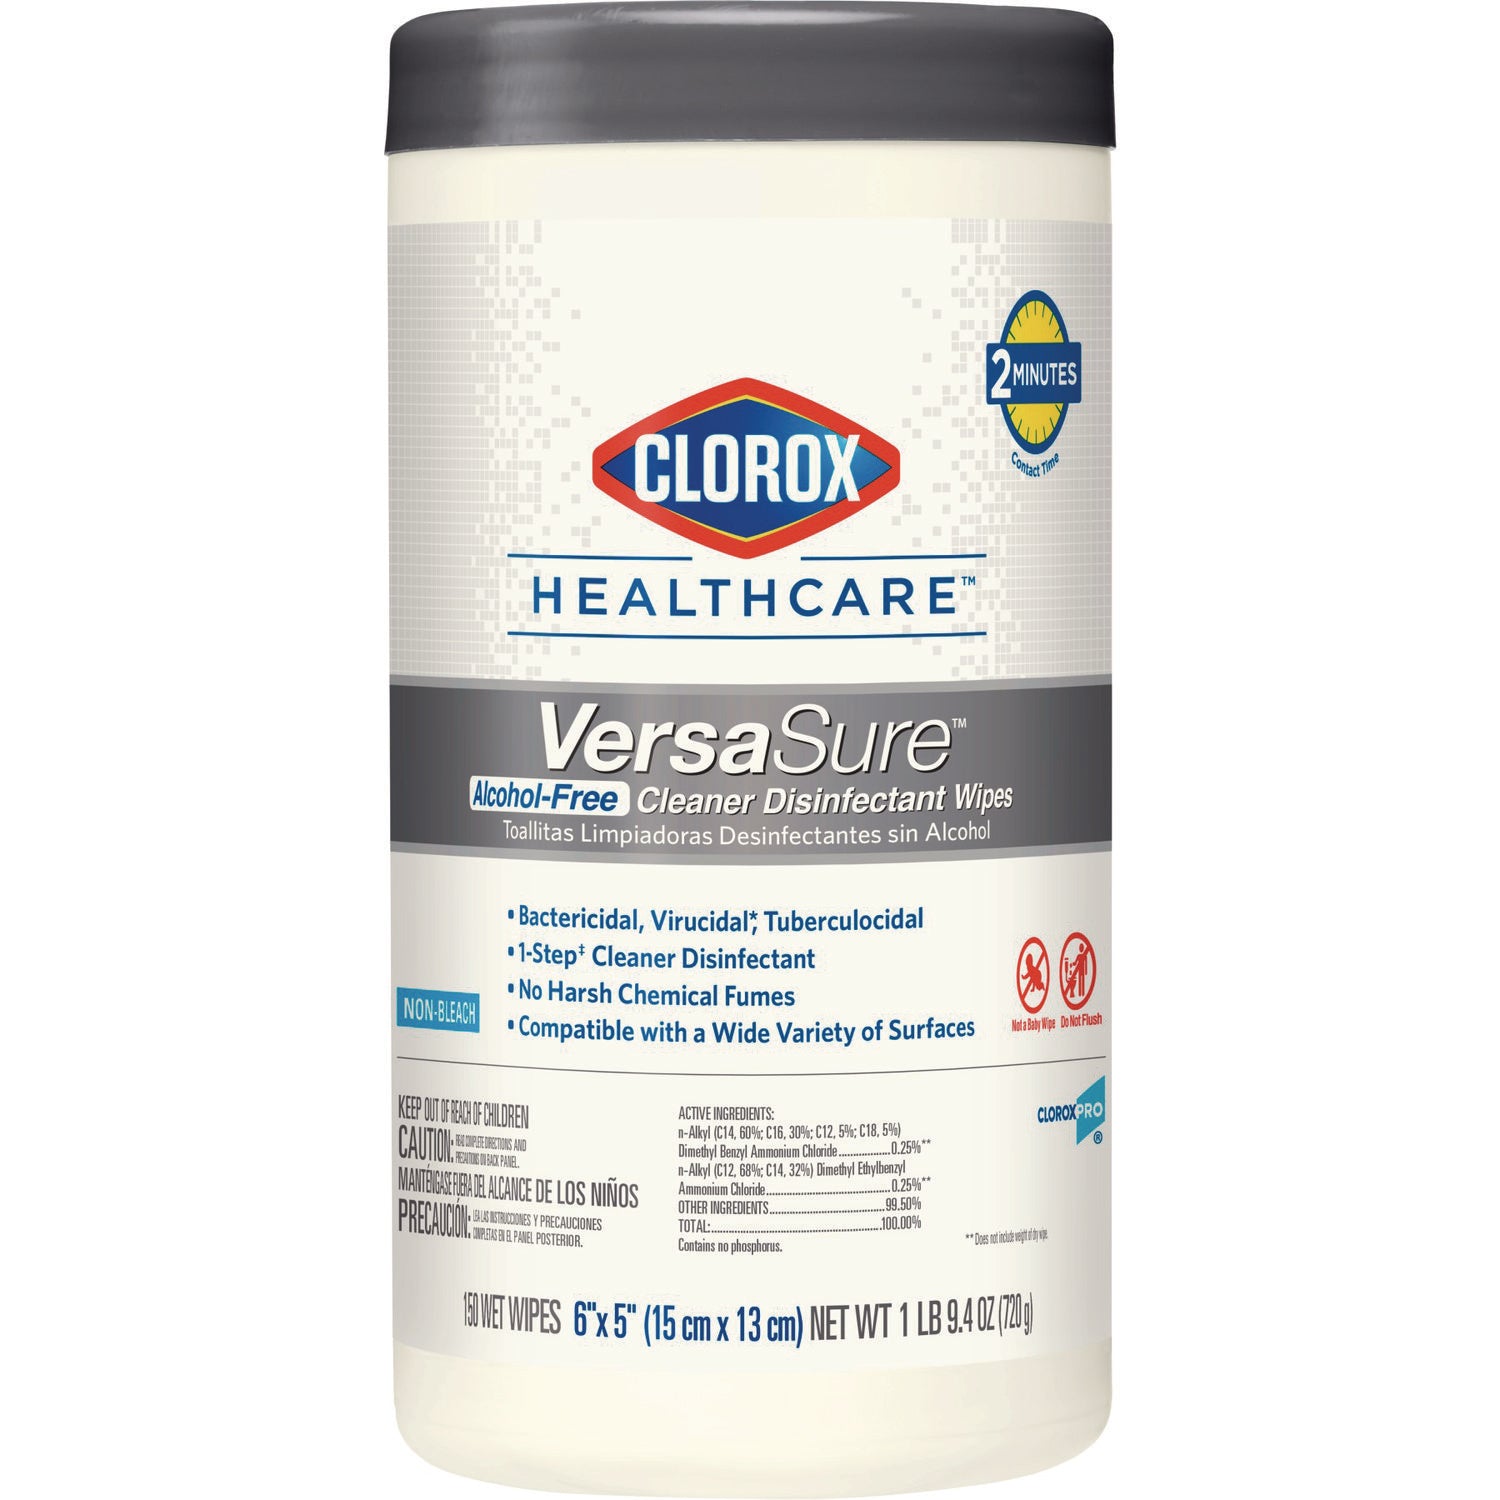 VersaSure Cleaner Disinfectant Wipes, 1-Ply, 6.75 x 8, Fragranced, White, 150 Towels/Canister - 1